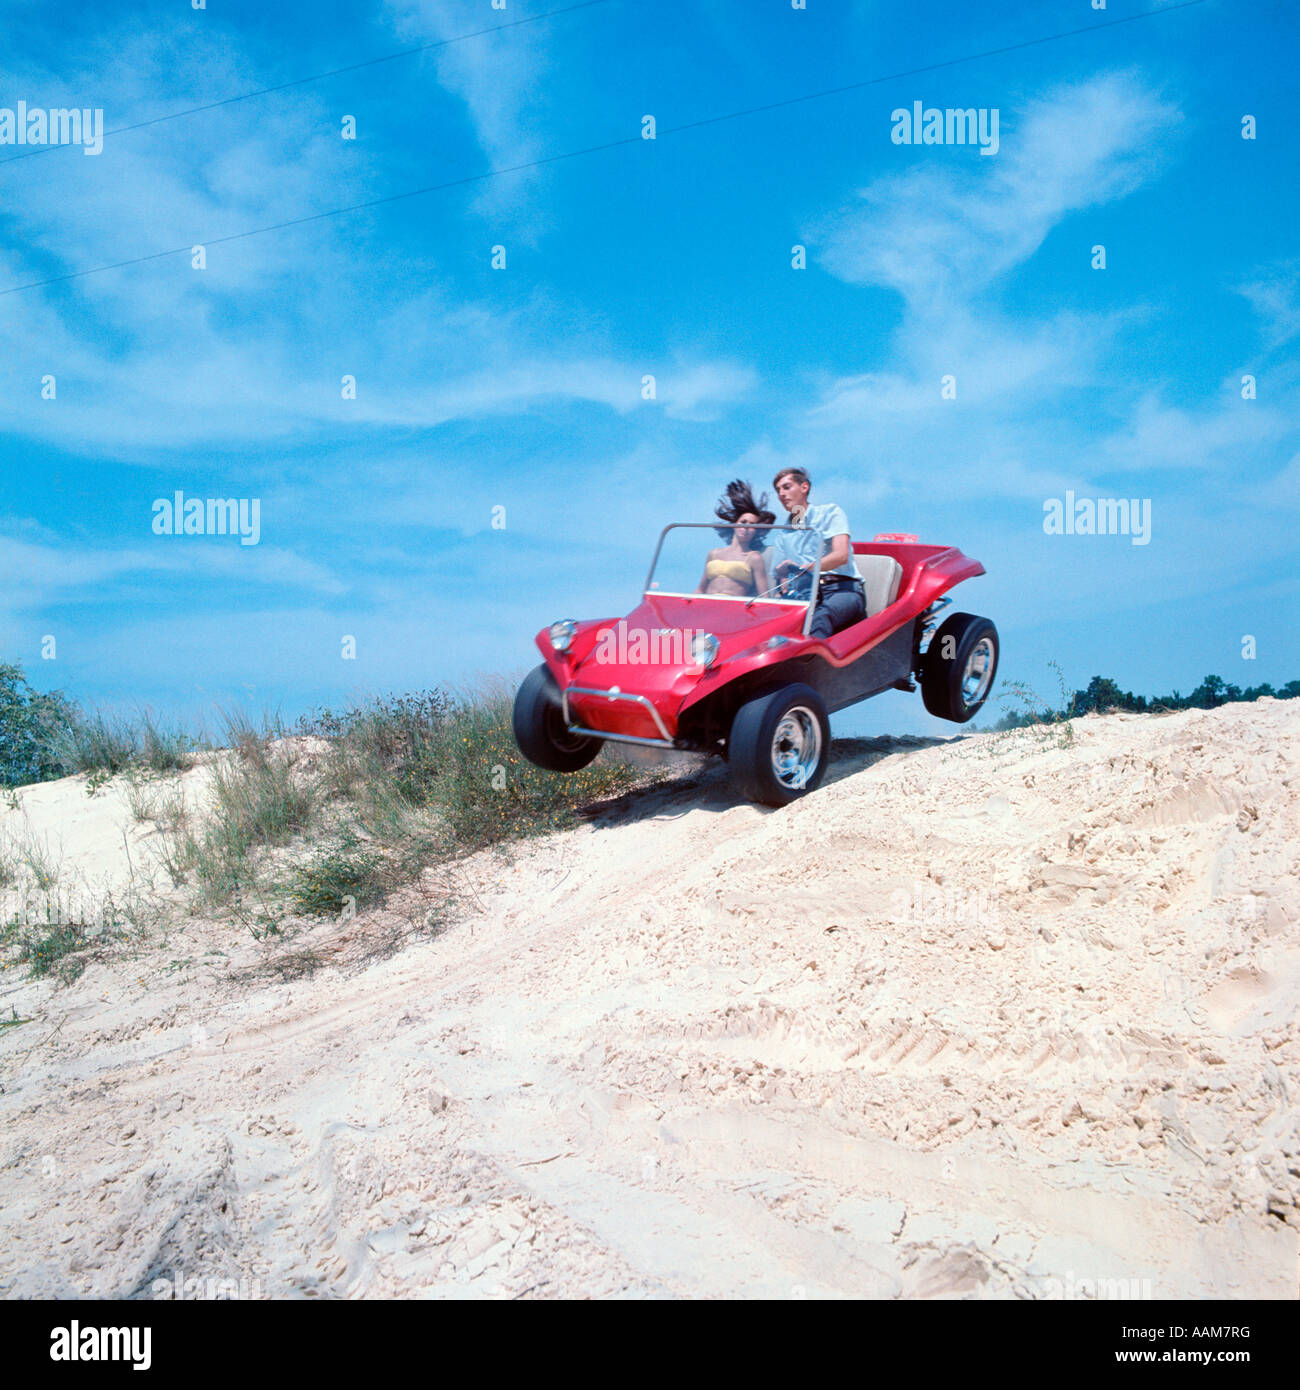 Old Dune Buggy High Resolution Stock Photography and Images - Alamy